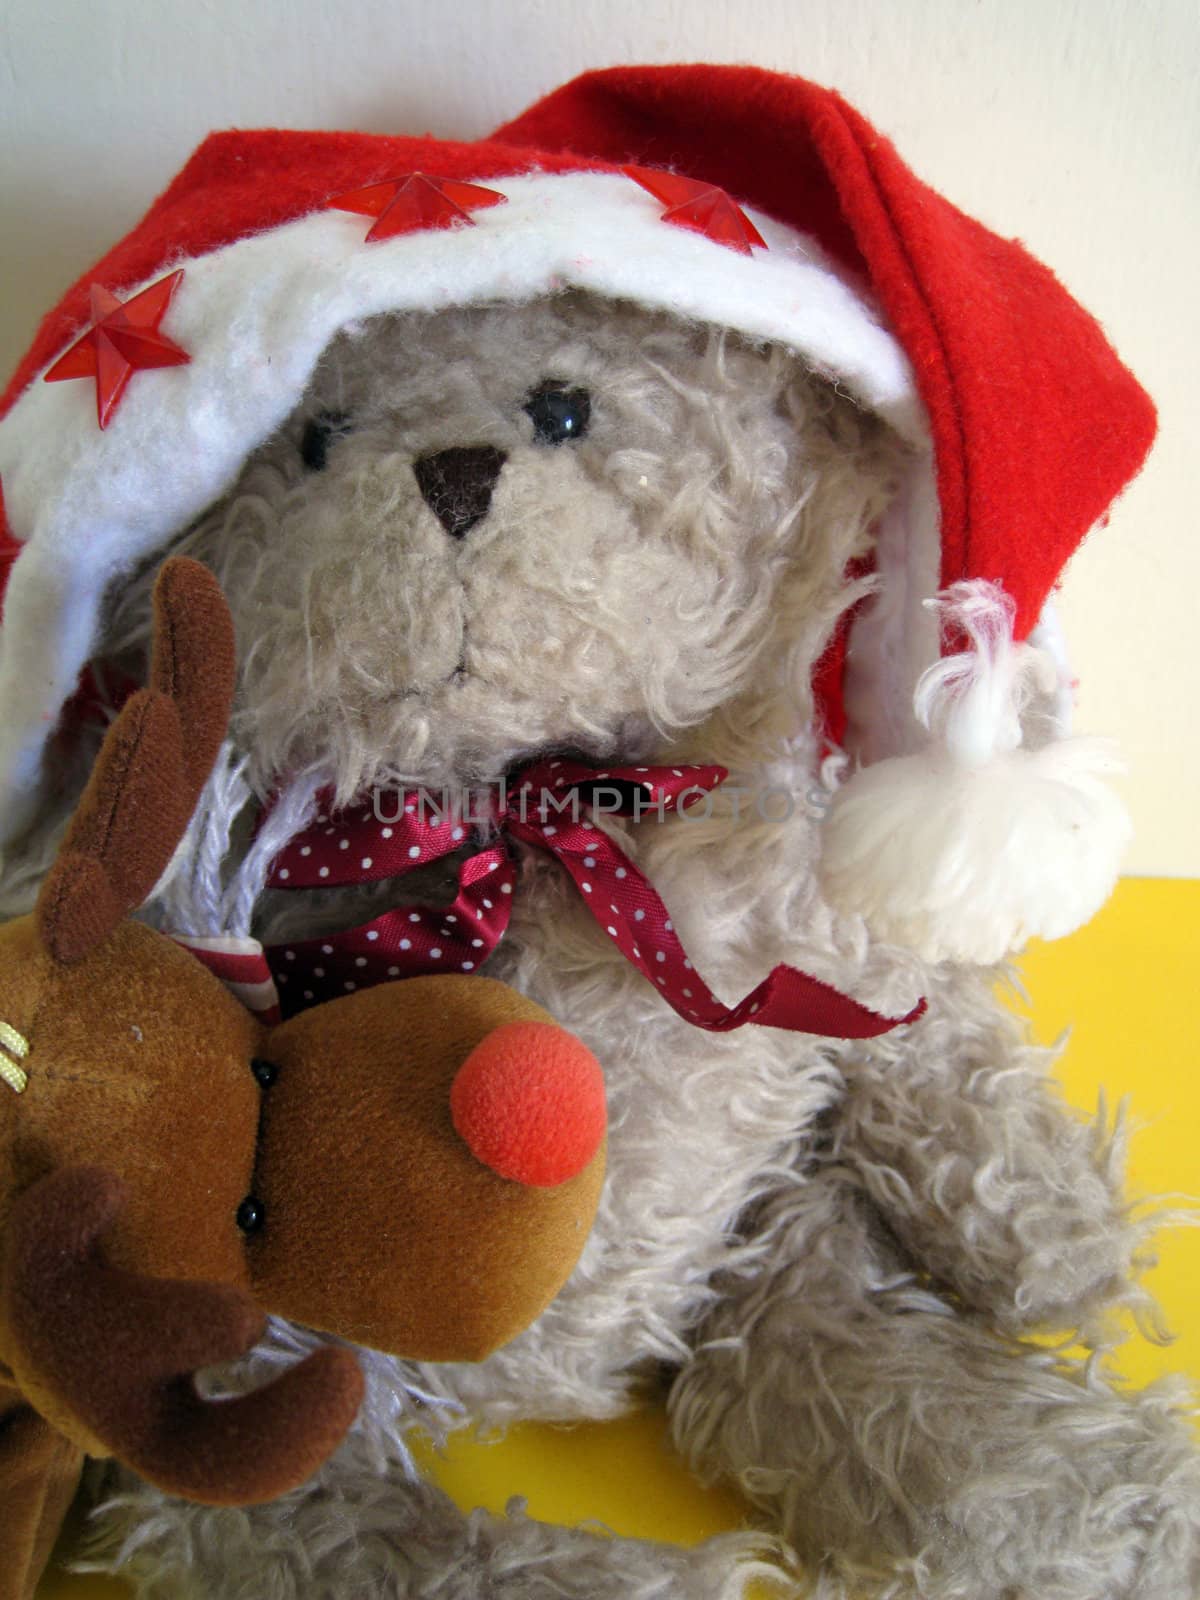 bear wear a Santa hat and his red nose reindeer